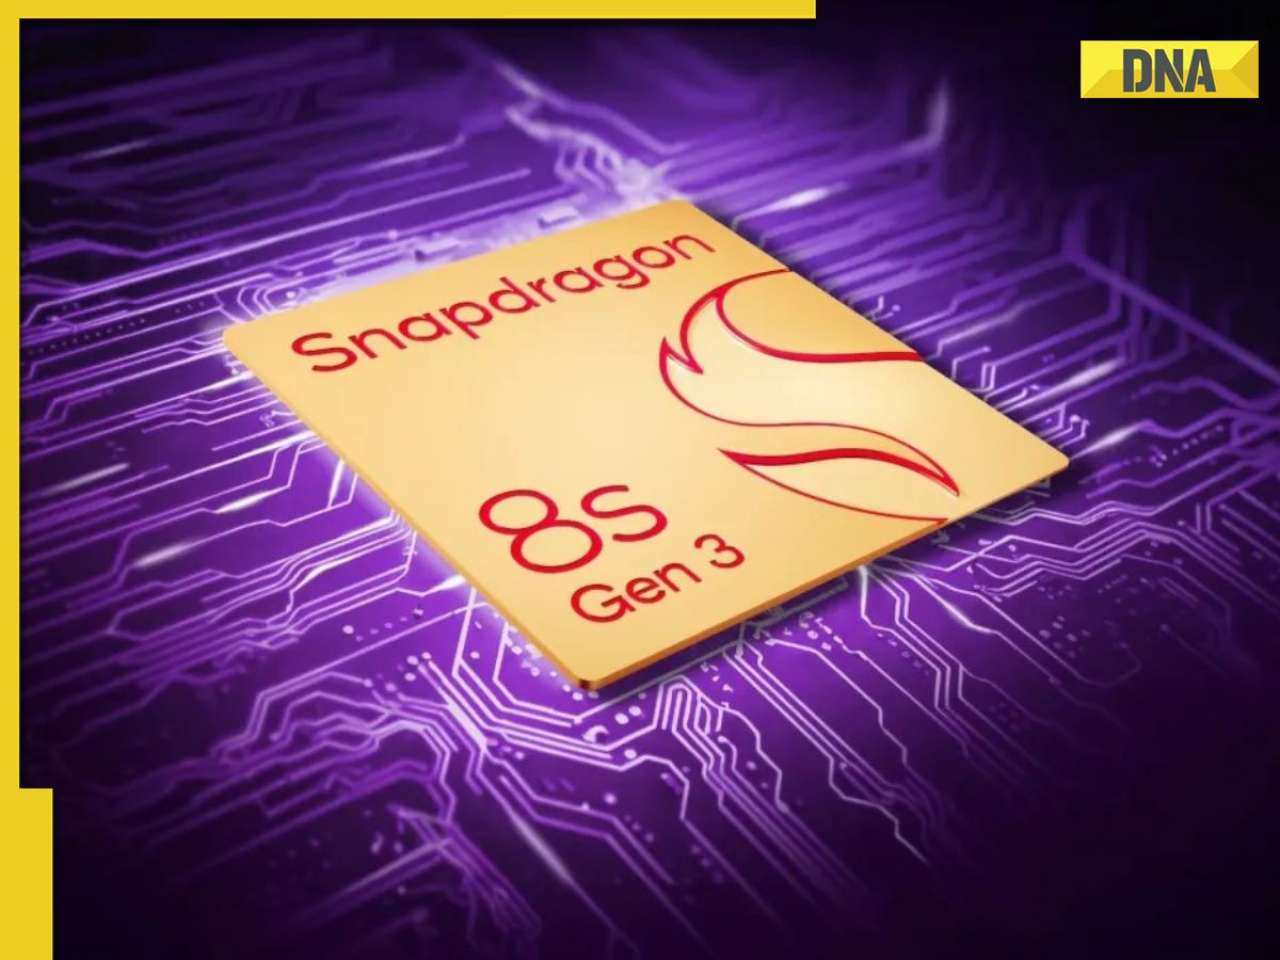 Qualcomm Snapdragon 8s Gen 3 for flagship Android phones unveiled, to be used by Realme, Redmi, Xiaomi...